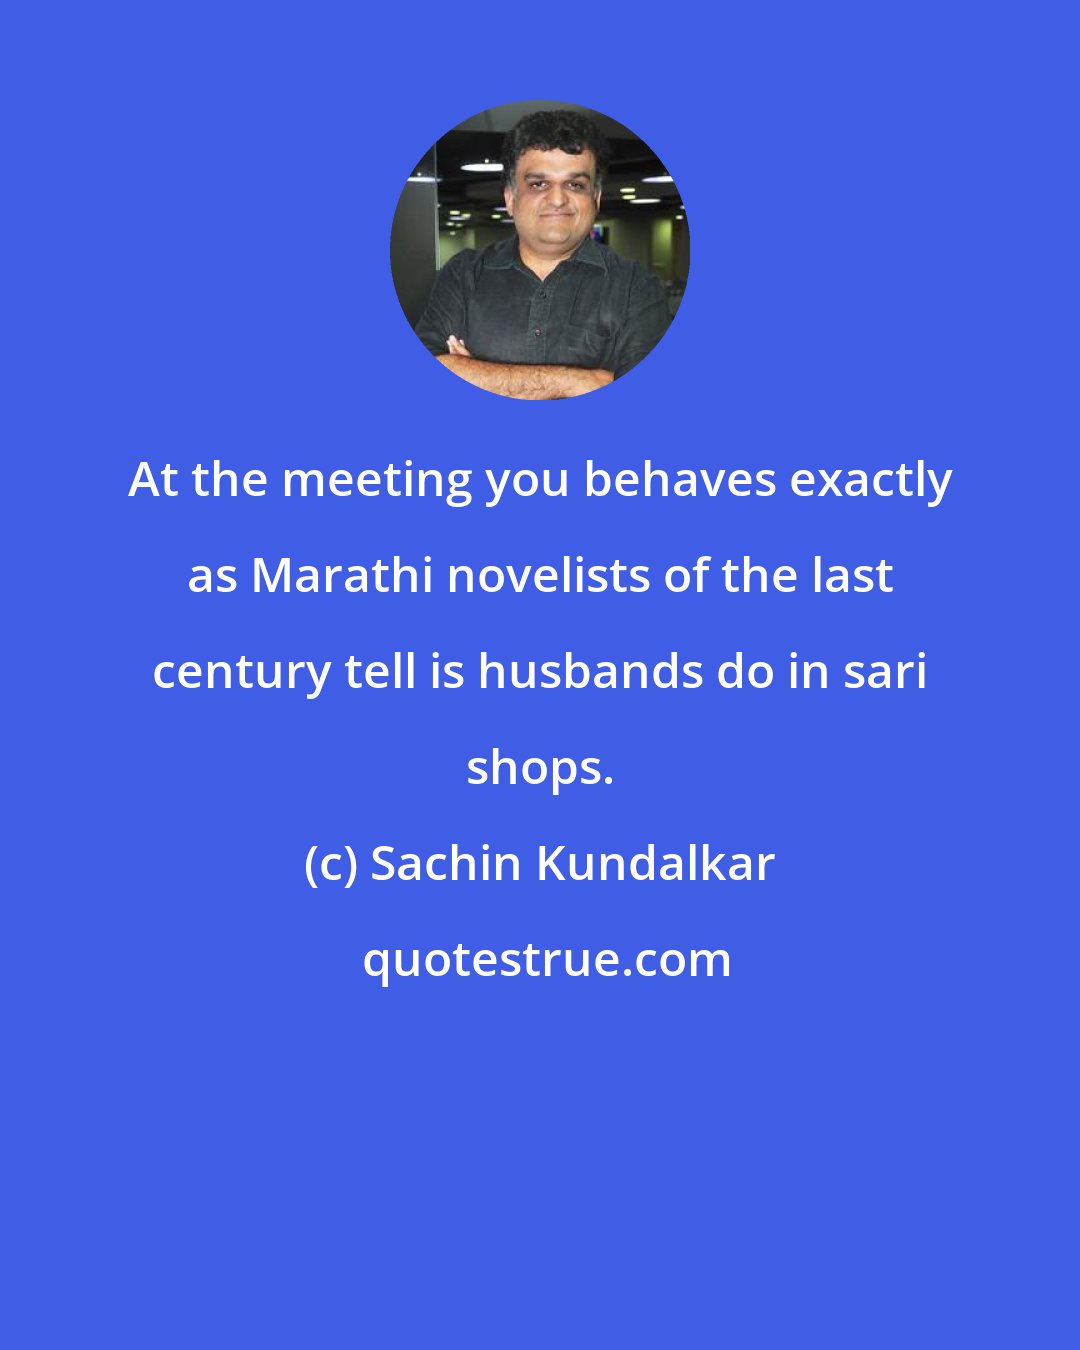 Sachin Kundalkar: At the meeting you behaves exactly as Marathi novelists of the last century tell is husbands do in sari shops.